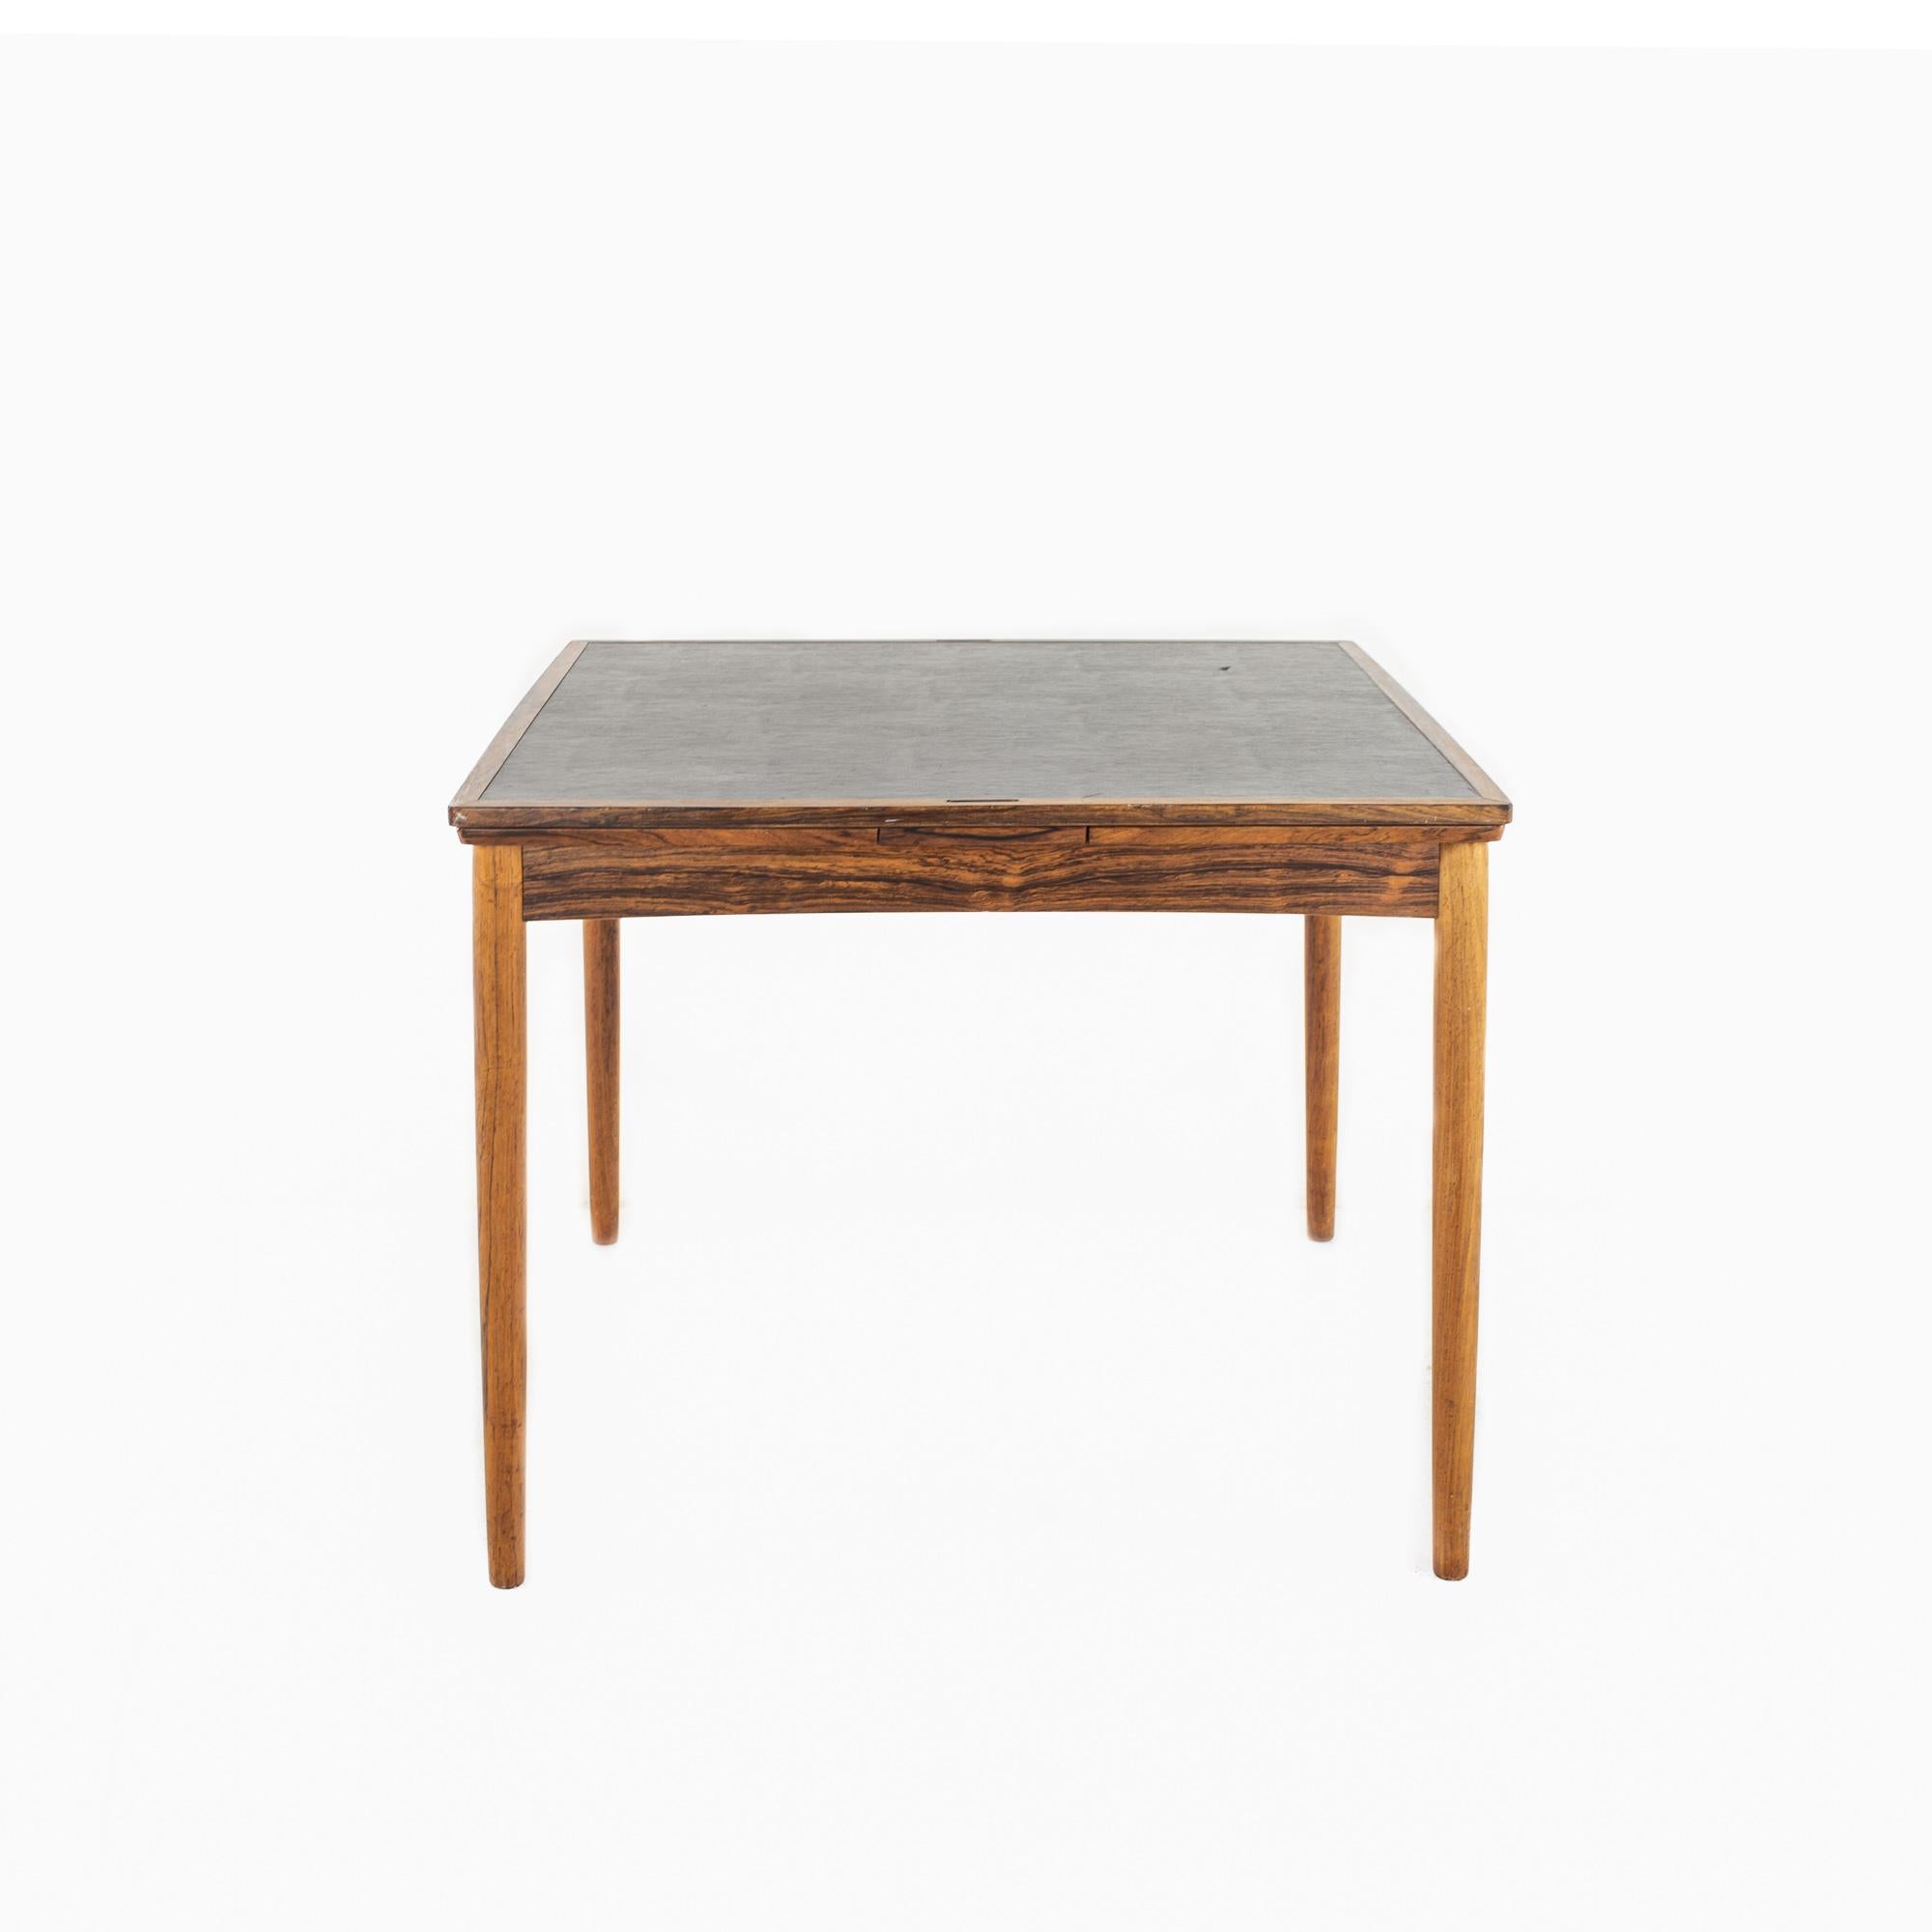 Poul Hundevad mid century rosewood expanding game table

The table measures: 35.25 wide x 35.25 deep x 27 high, with a chair clearance of 23.5 inches; each leaf is 14 inches wide, making a maximum table width of 63.25 inches when both leaves are